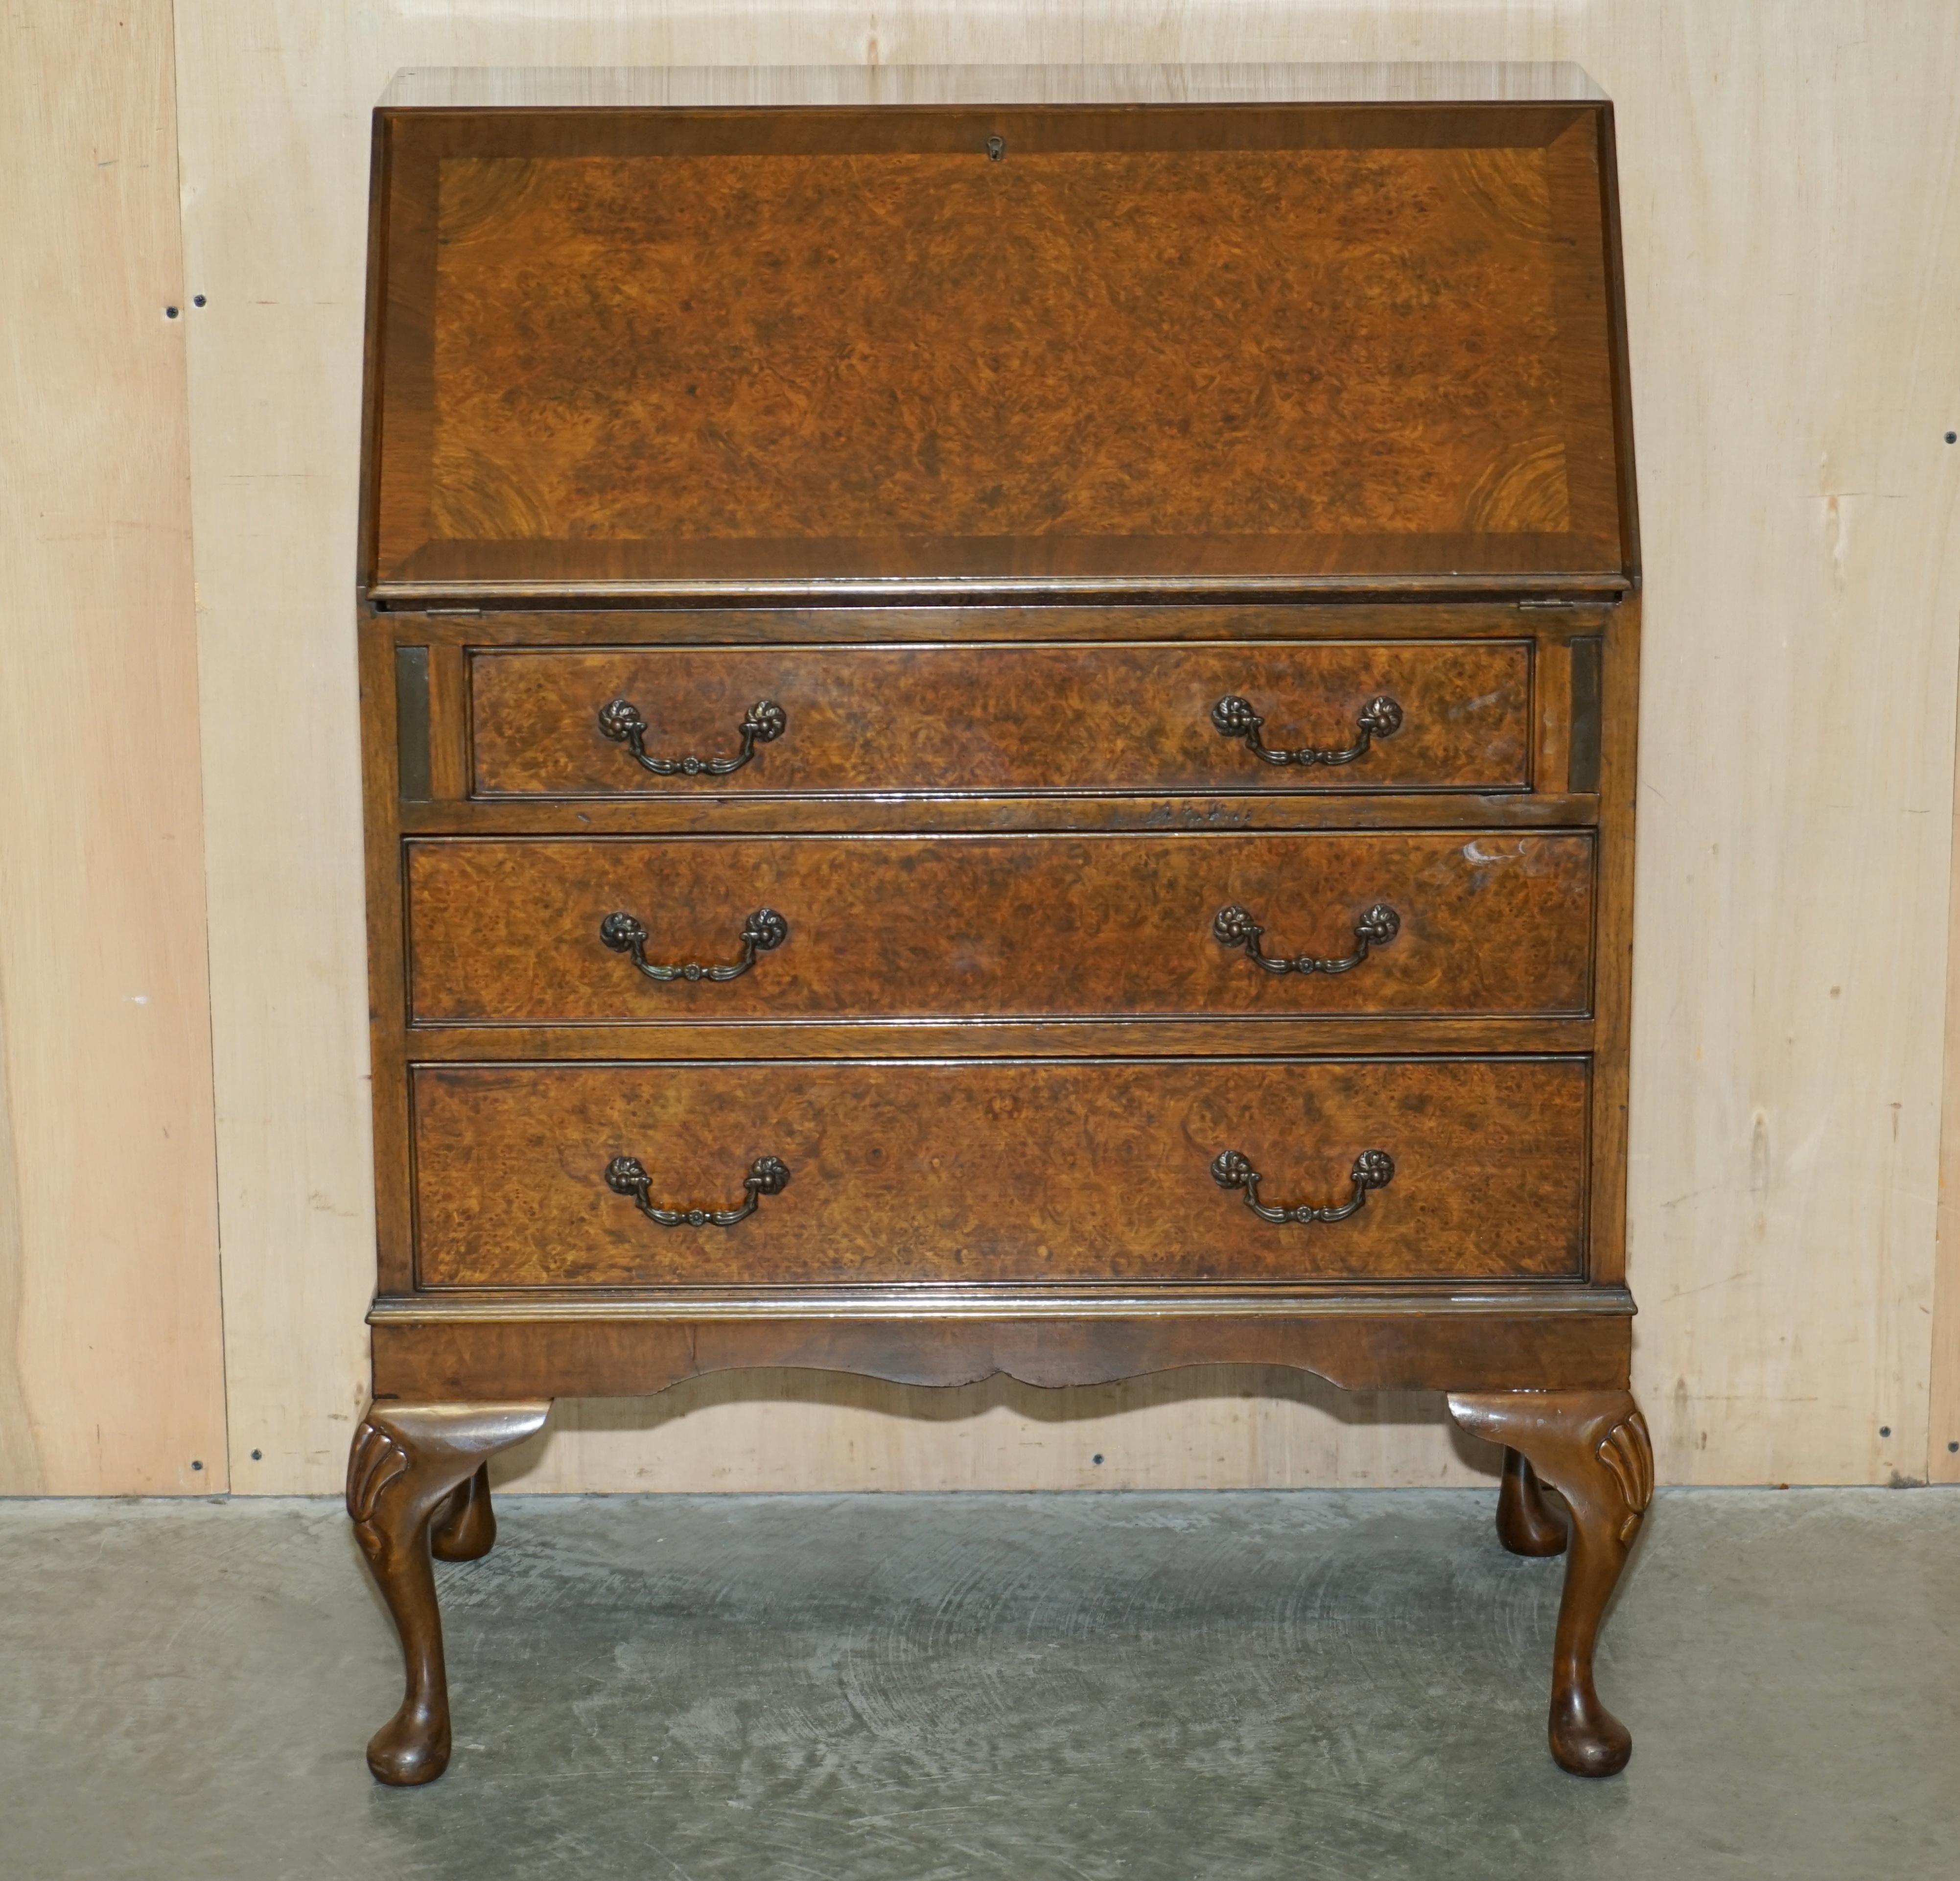 We are delighted to offer for sale this lovely circa 1900 Burr & Burl Walnut drop front bureau 

A good looking and well-made piece, you don't come across many in Burr walnut, it is a super decorative timber that glows in the right light. The